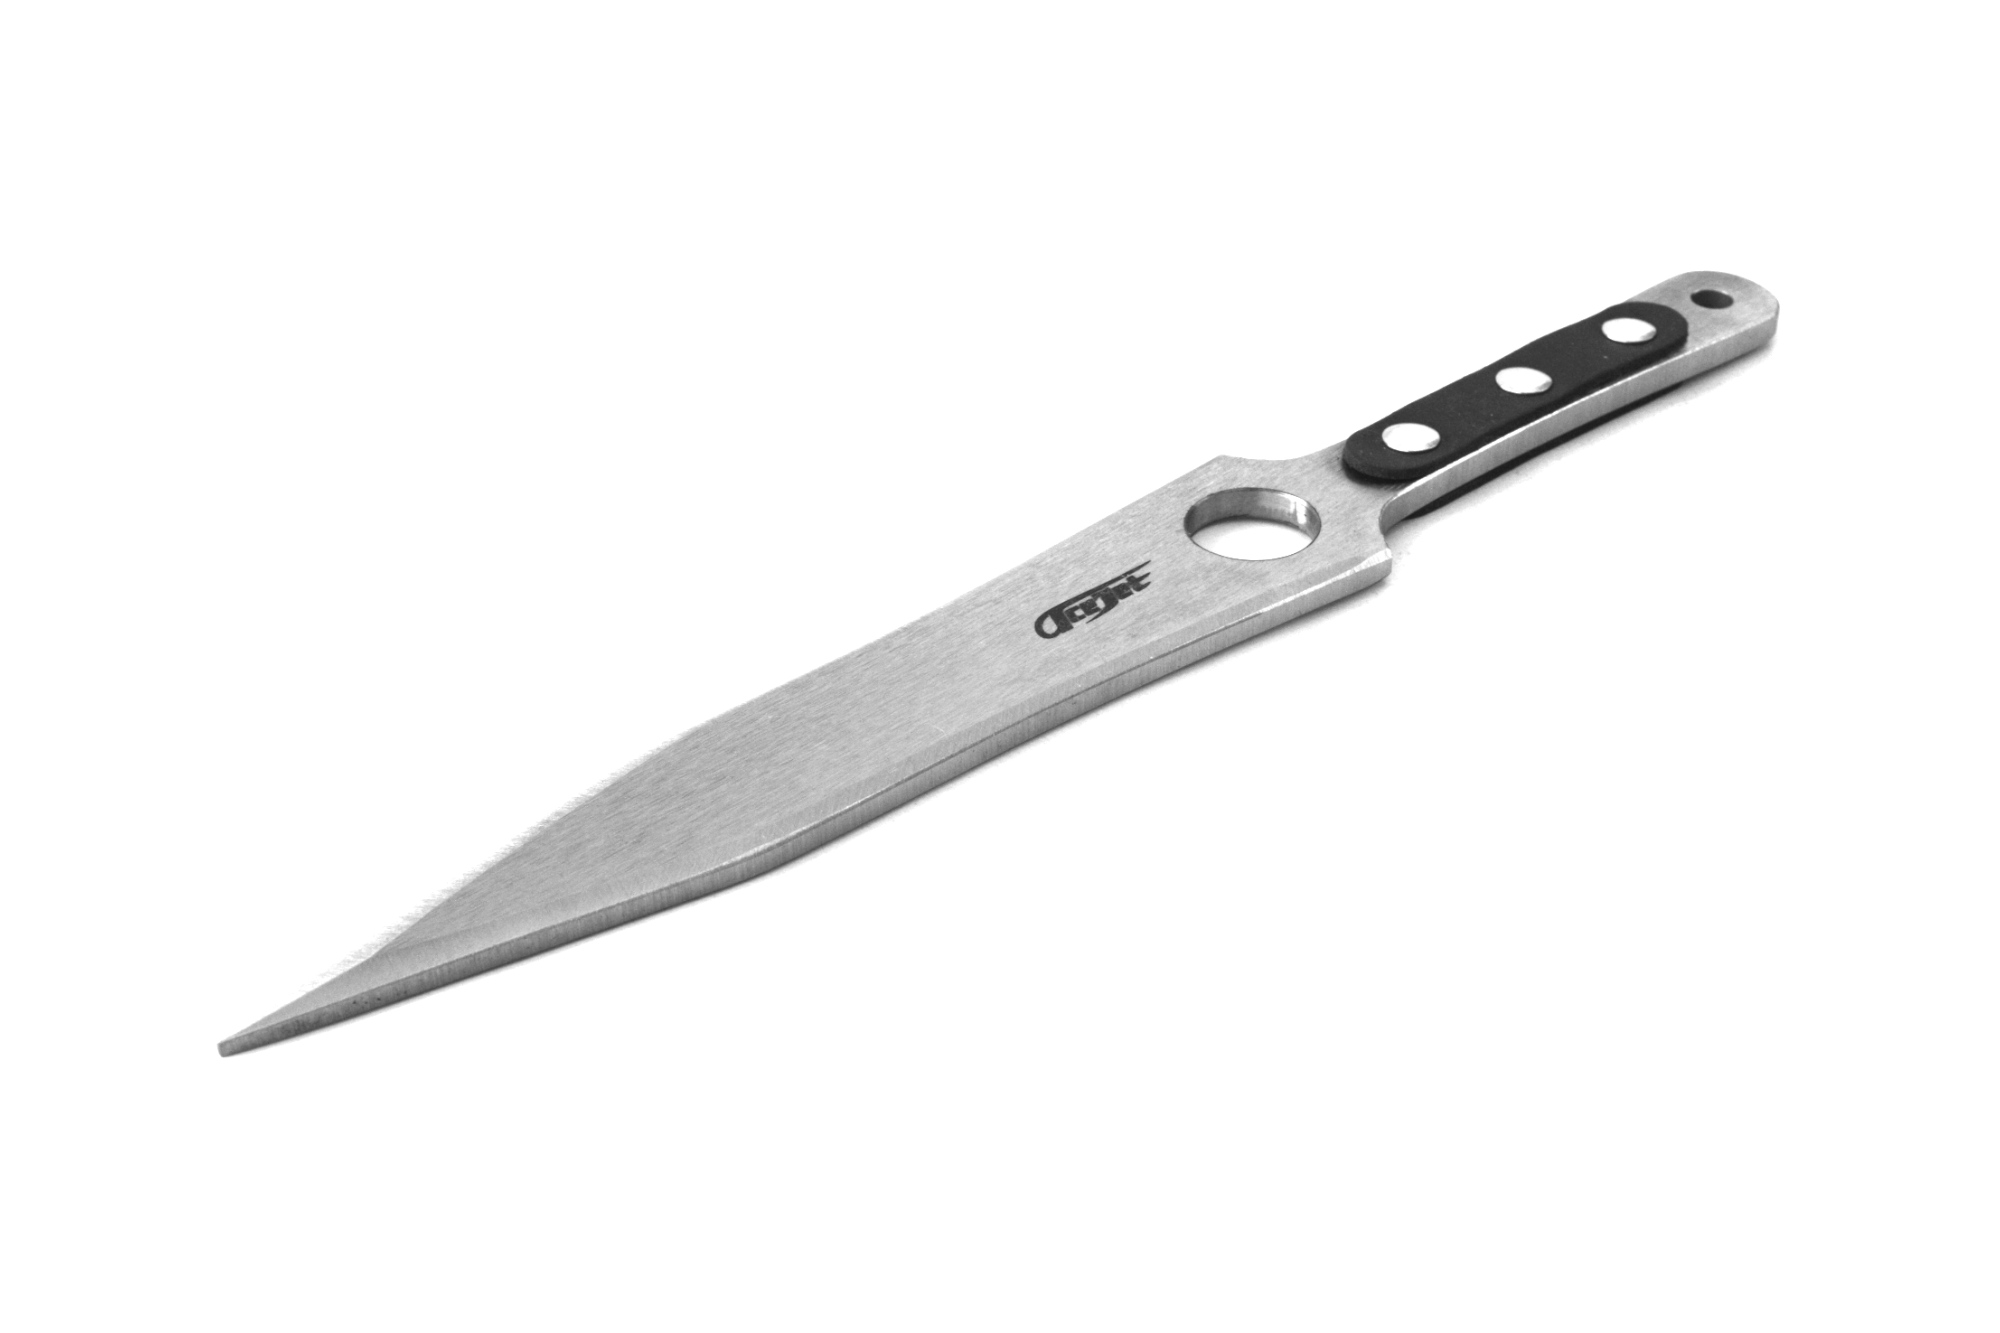 ACEJET MAXIMUS - Spinner Throwing knife